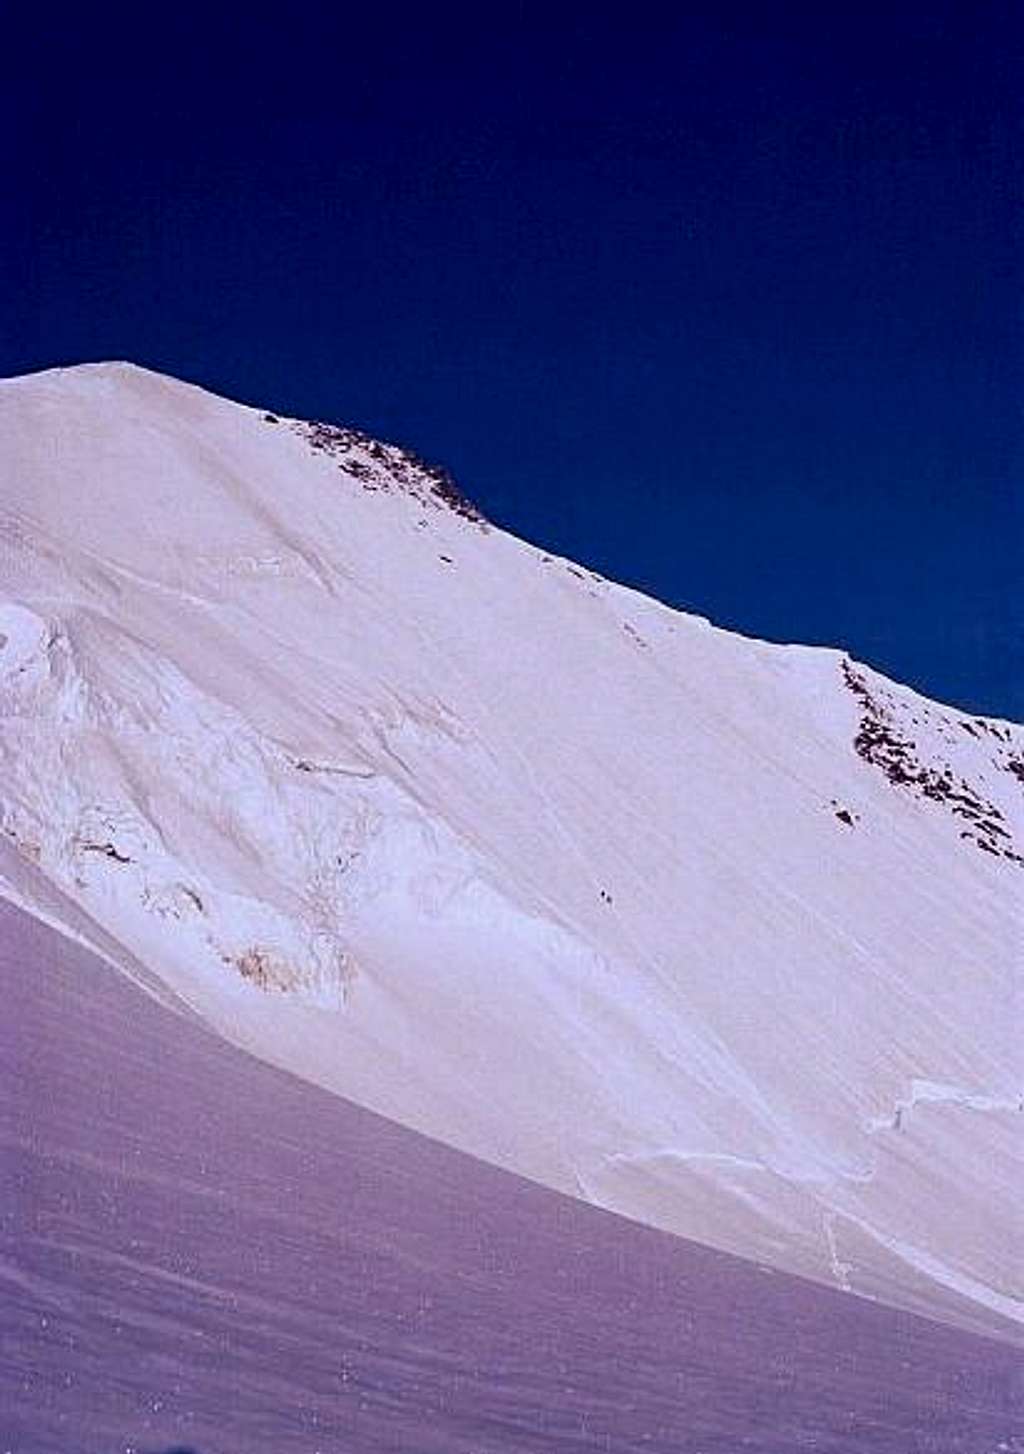 View of Hohberghorn - Northface